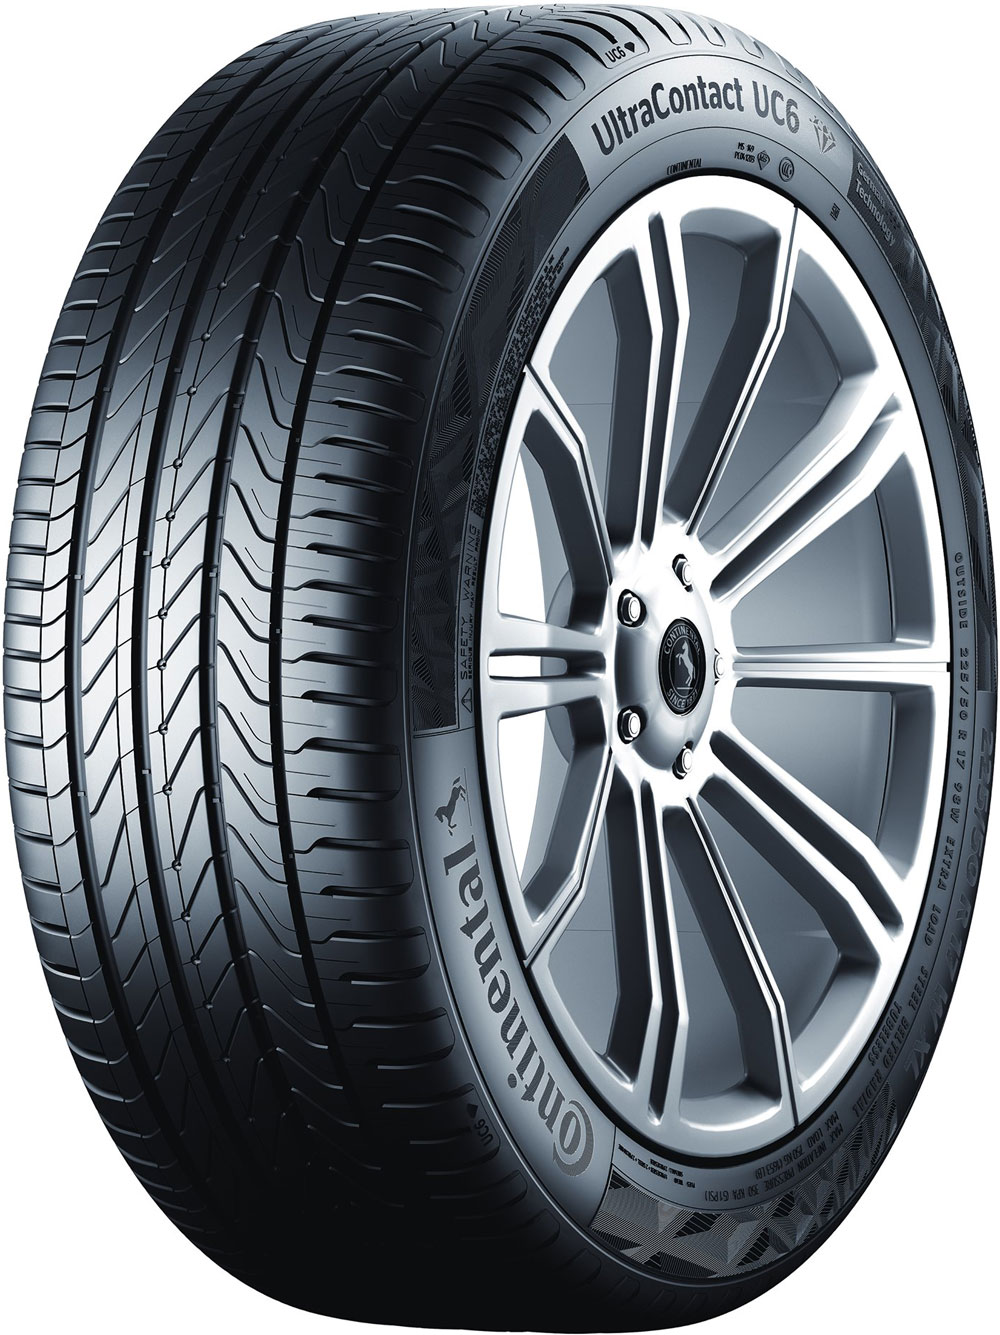 CONTINENTAL UltraContact XL 225/40 R18 92W